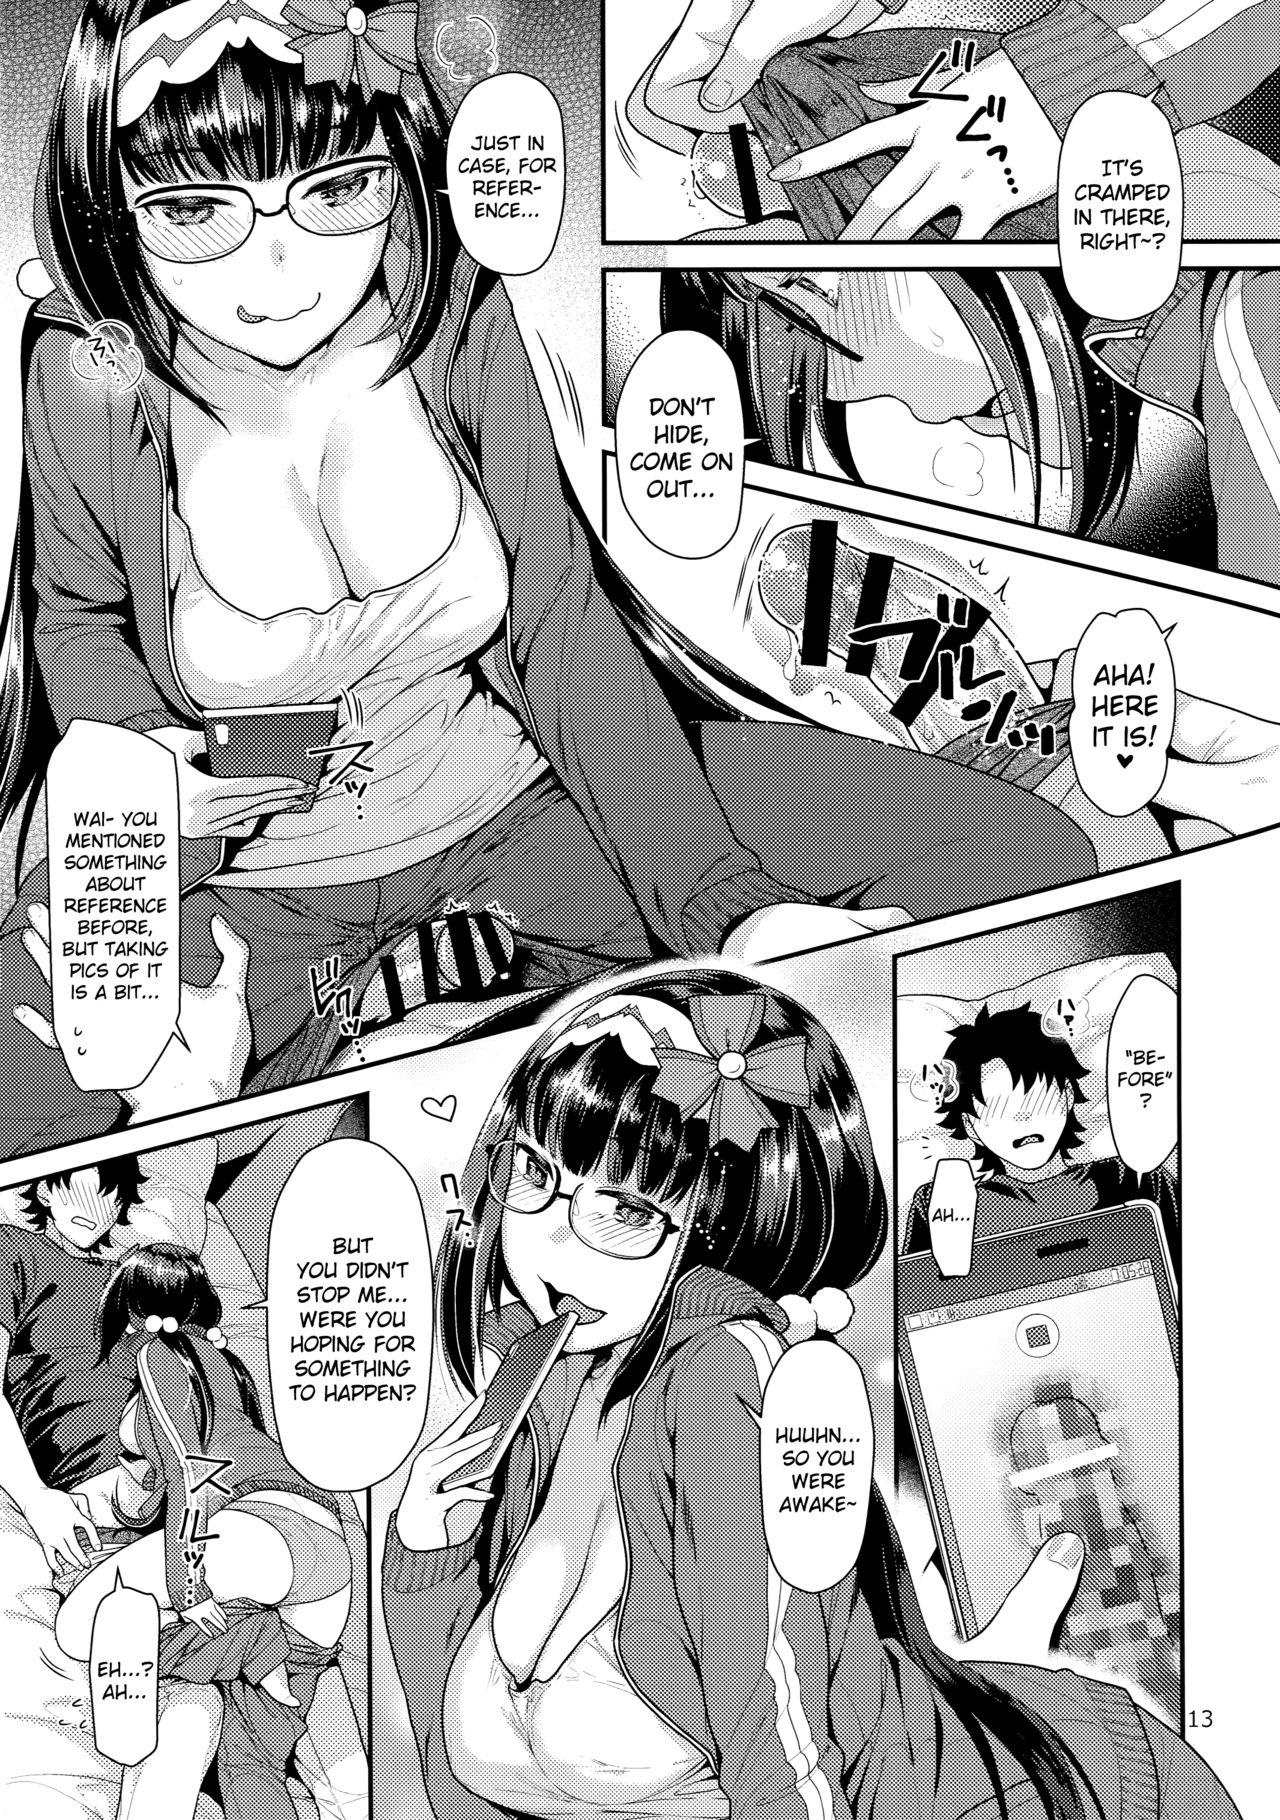 Suruba Midara Midareru Hime Jijou | The Dirty And Confused Girl's Circumstances - Fate grand order Outdoor - Page 12